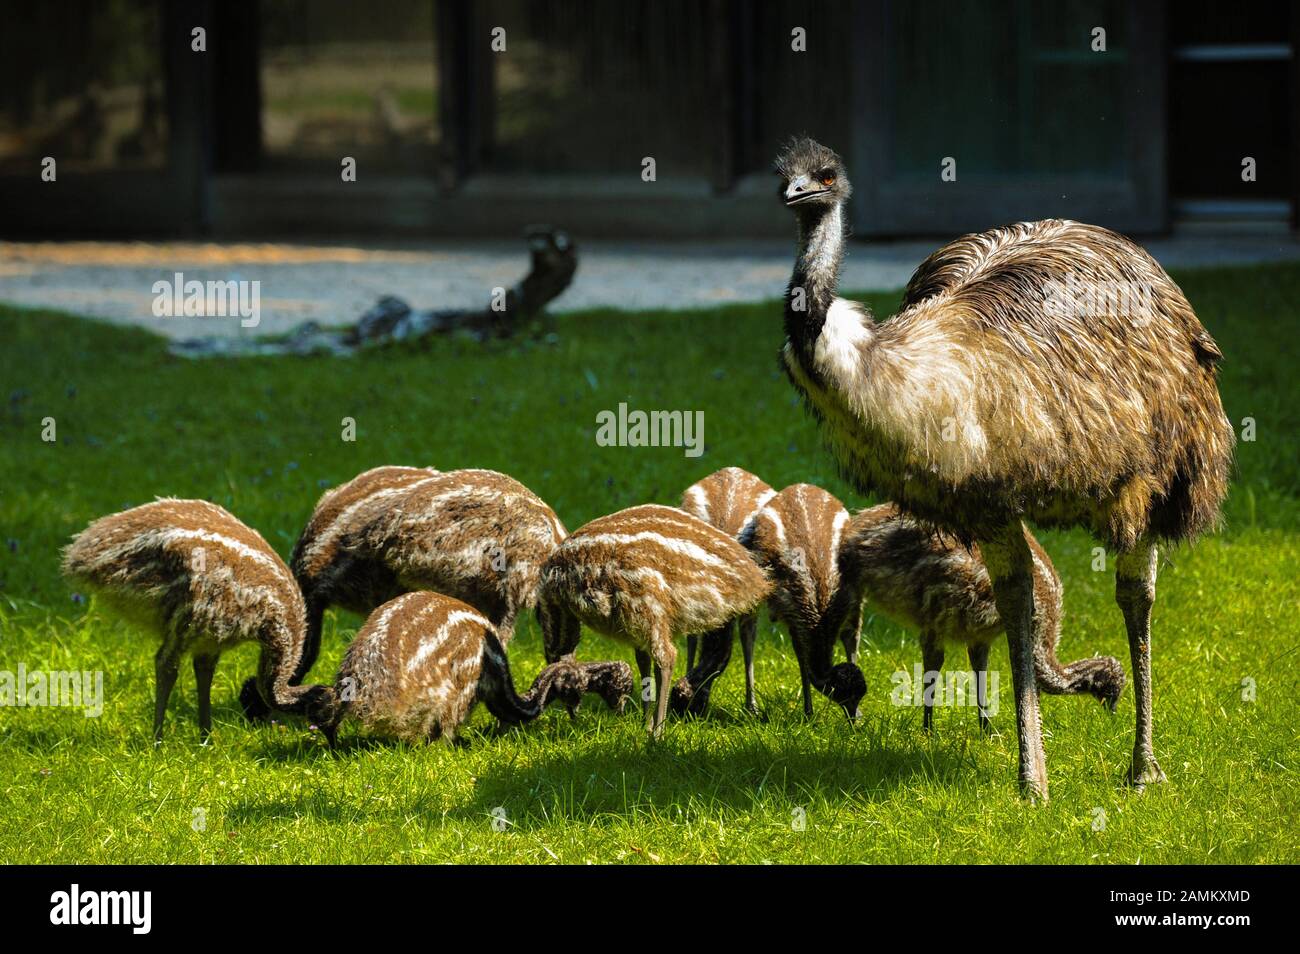 The emu father Kanoro alone takes care of the eight-headed offspring in the zoo Hellabrunn in Munich. [automated translation] Stock Photo